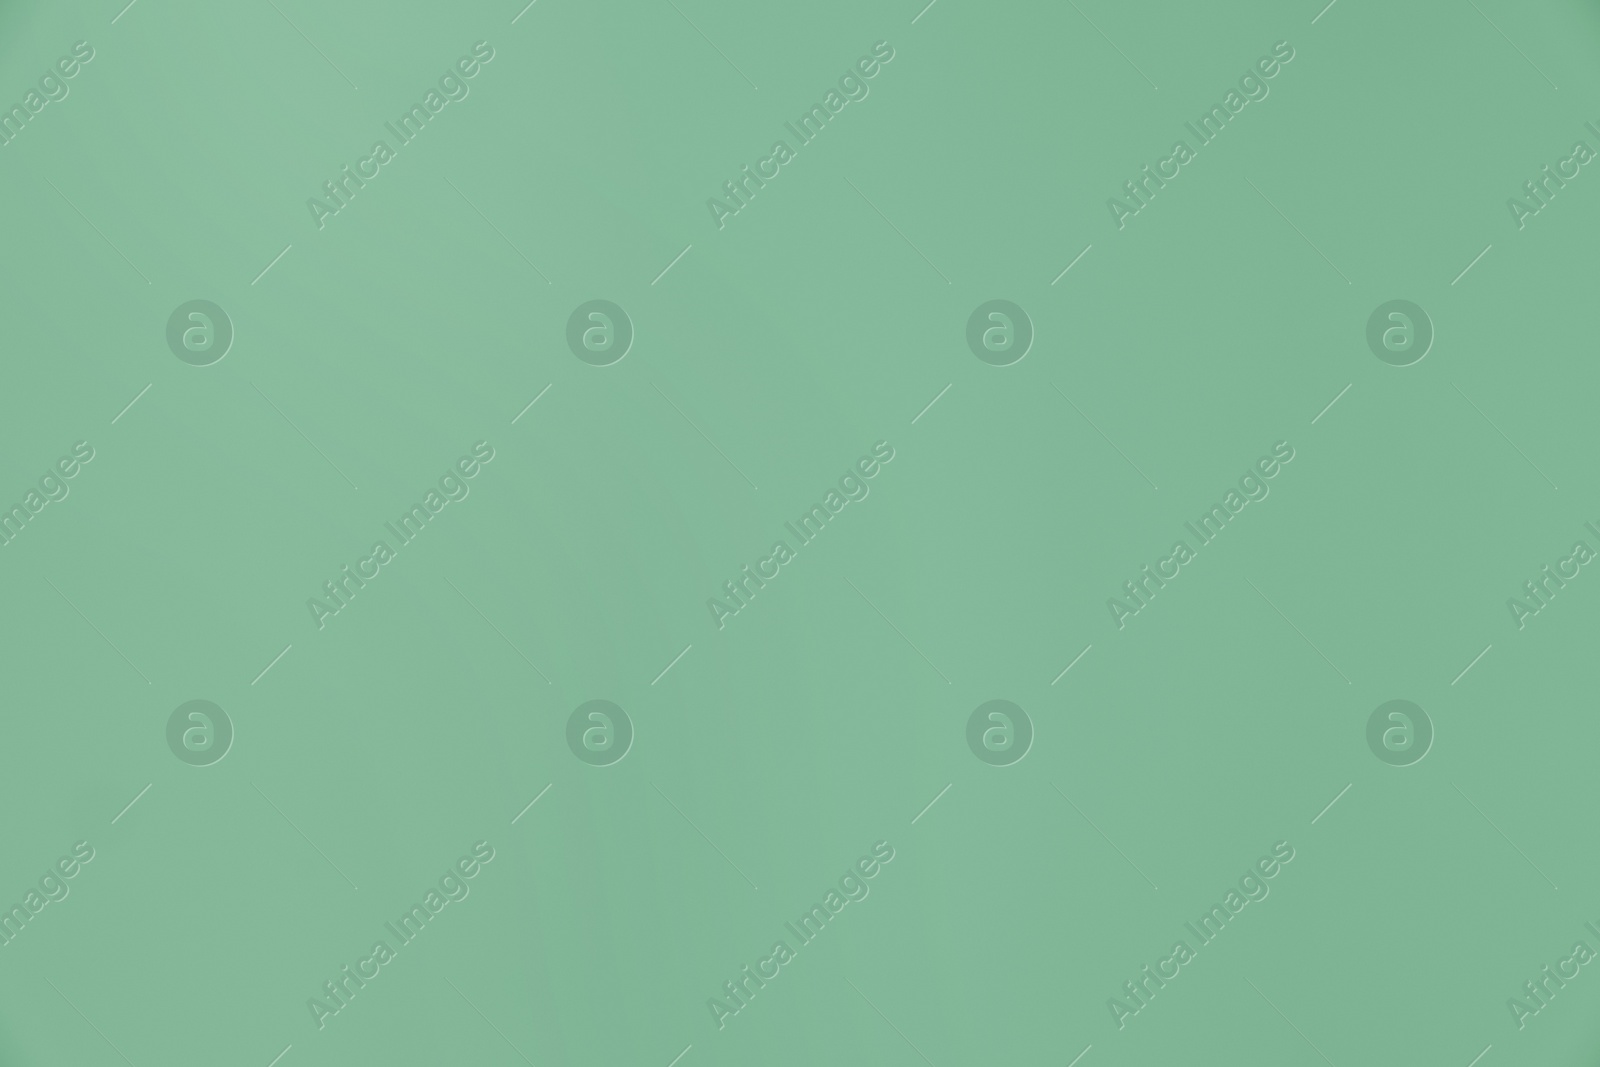 Image of Texture of wall as background. Image toned in mint color 